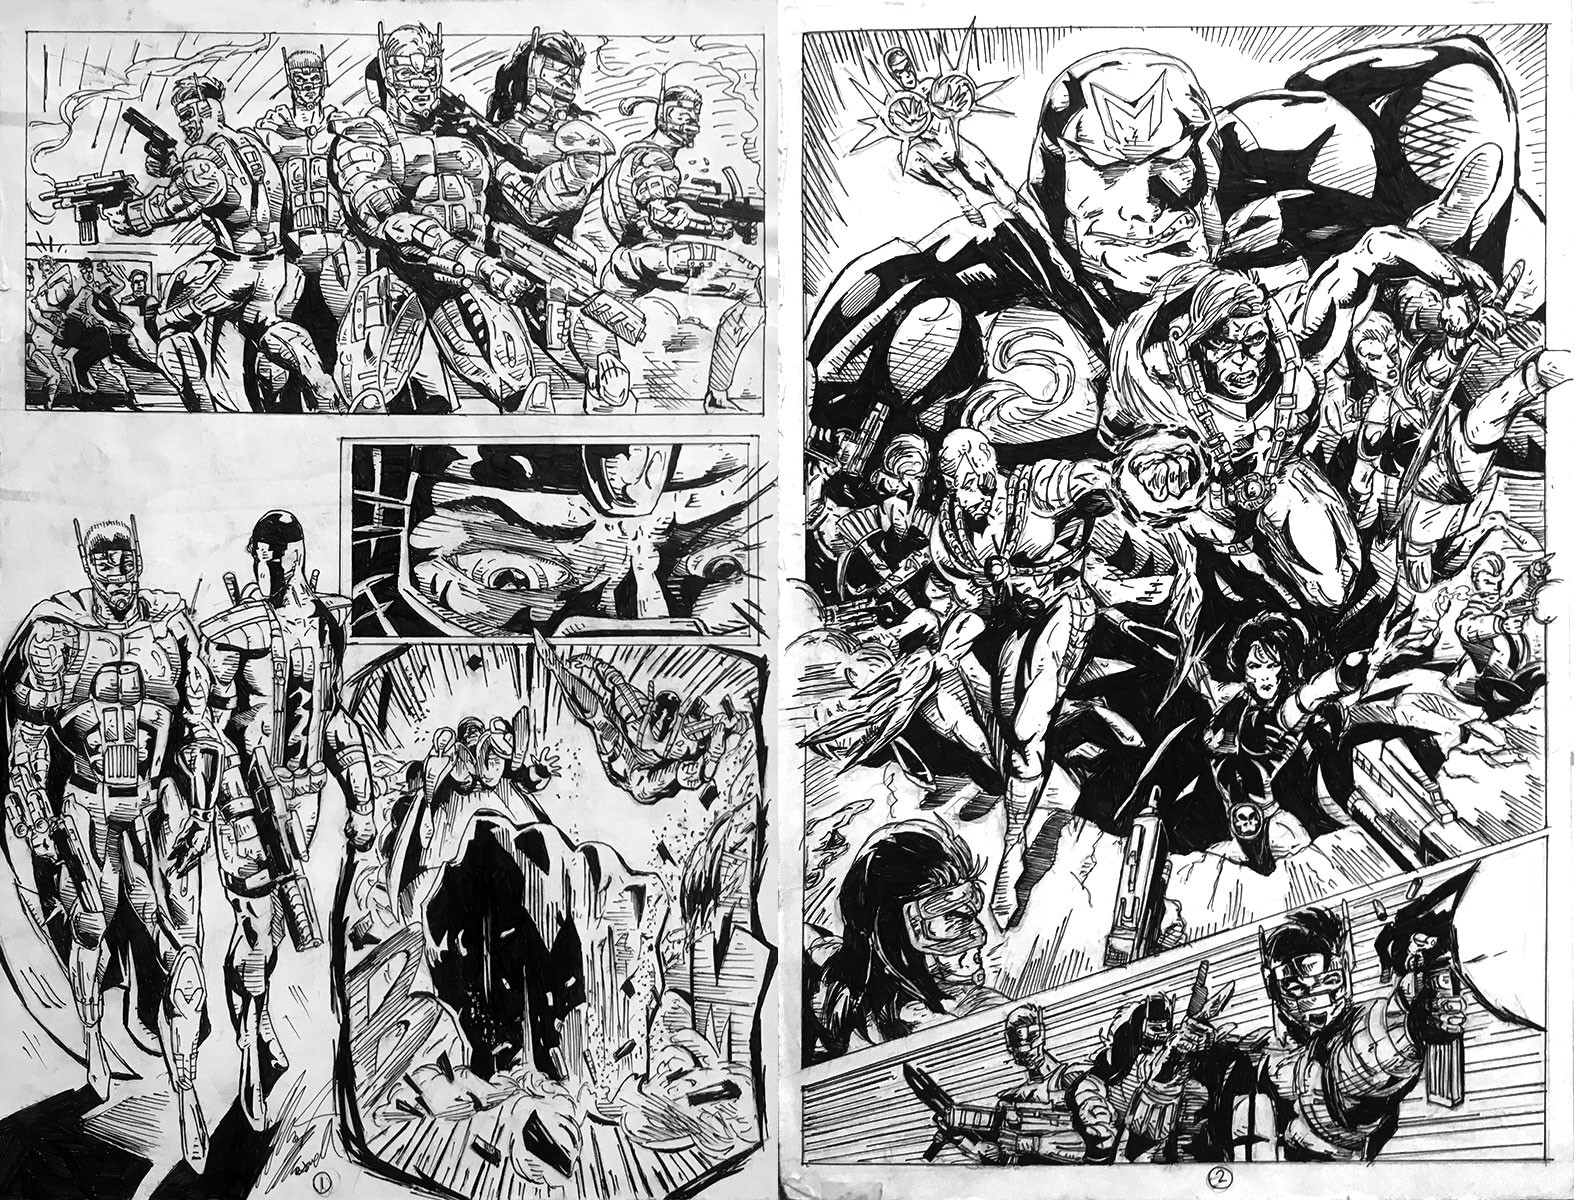 This was a 2-page spread done as a submission to Image comics years ago when they were a single entity as a publisher. This was before I had seen anyone other than Jim Lee draw the WildC.A.T.S.